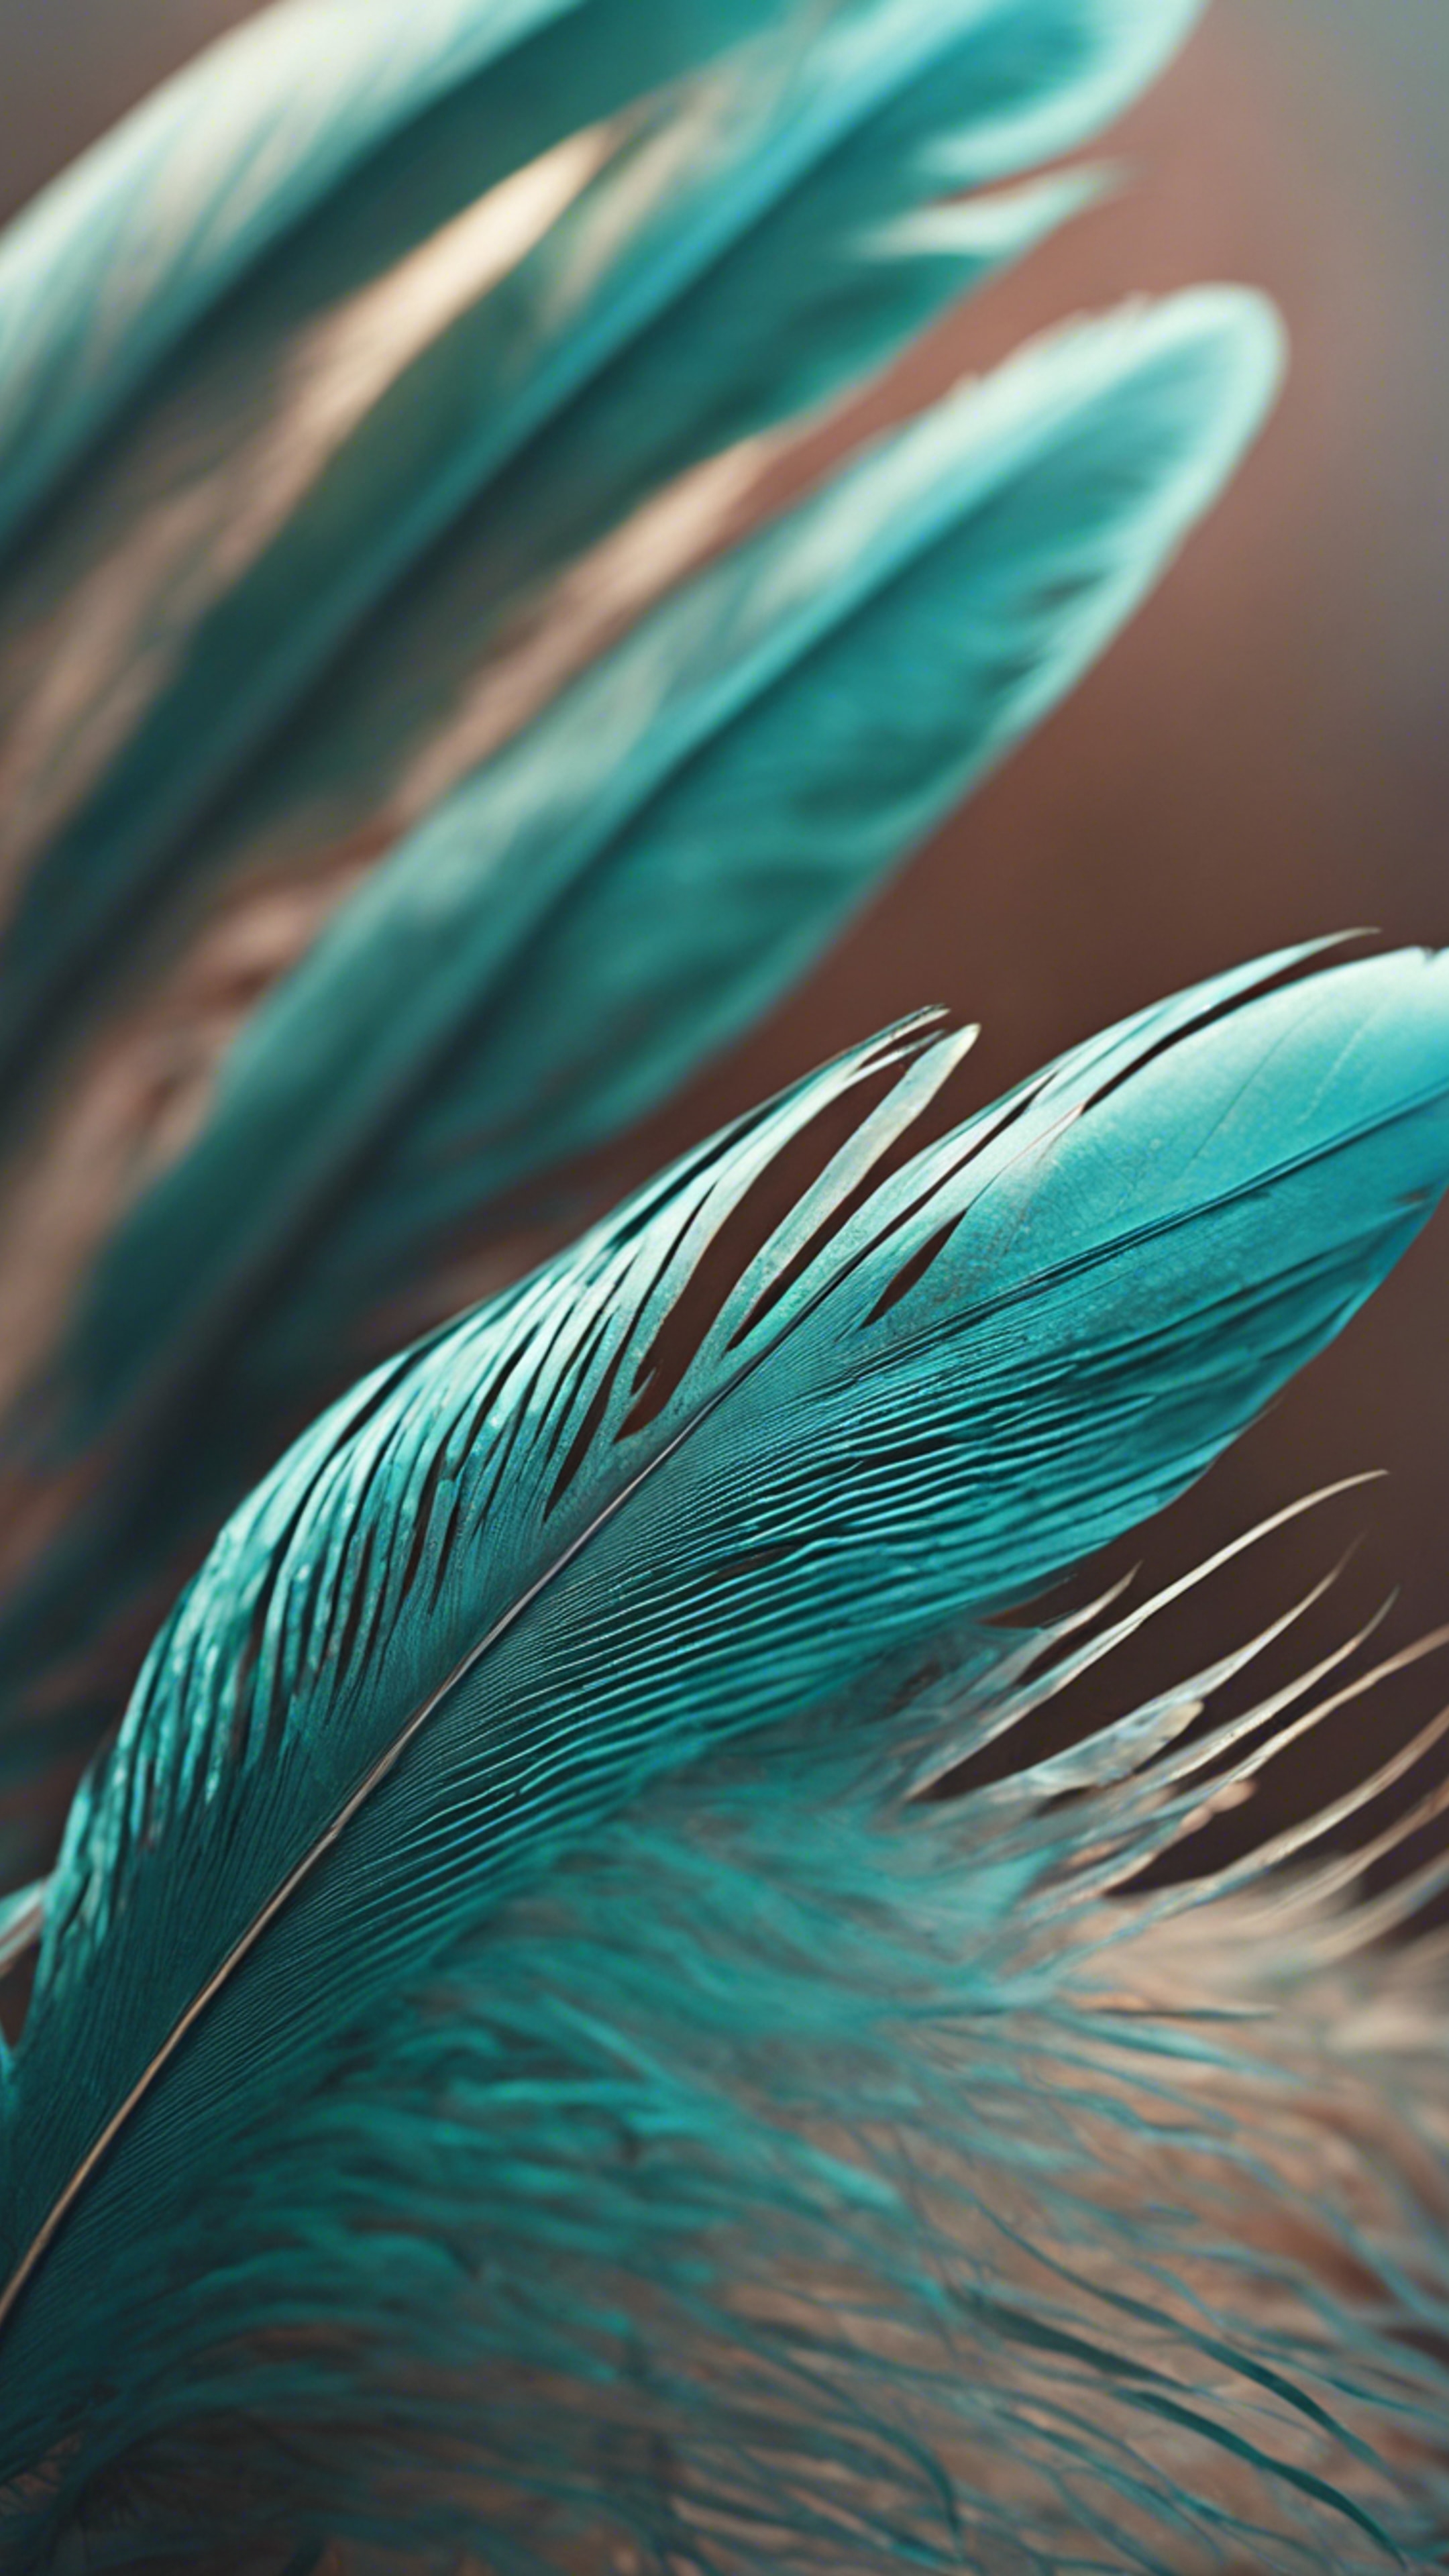 A close-up view of an exotic cool teal-colored birds' feather. ផ្ទាំង​រូបភាព[44d0beeee9f542d4ae1e]